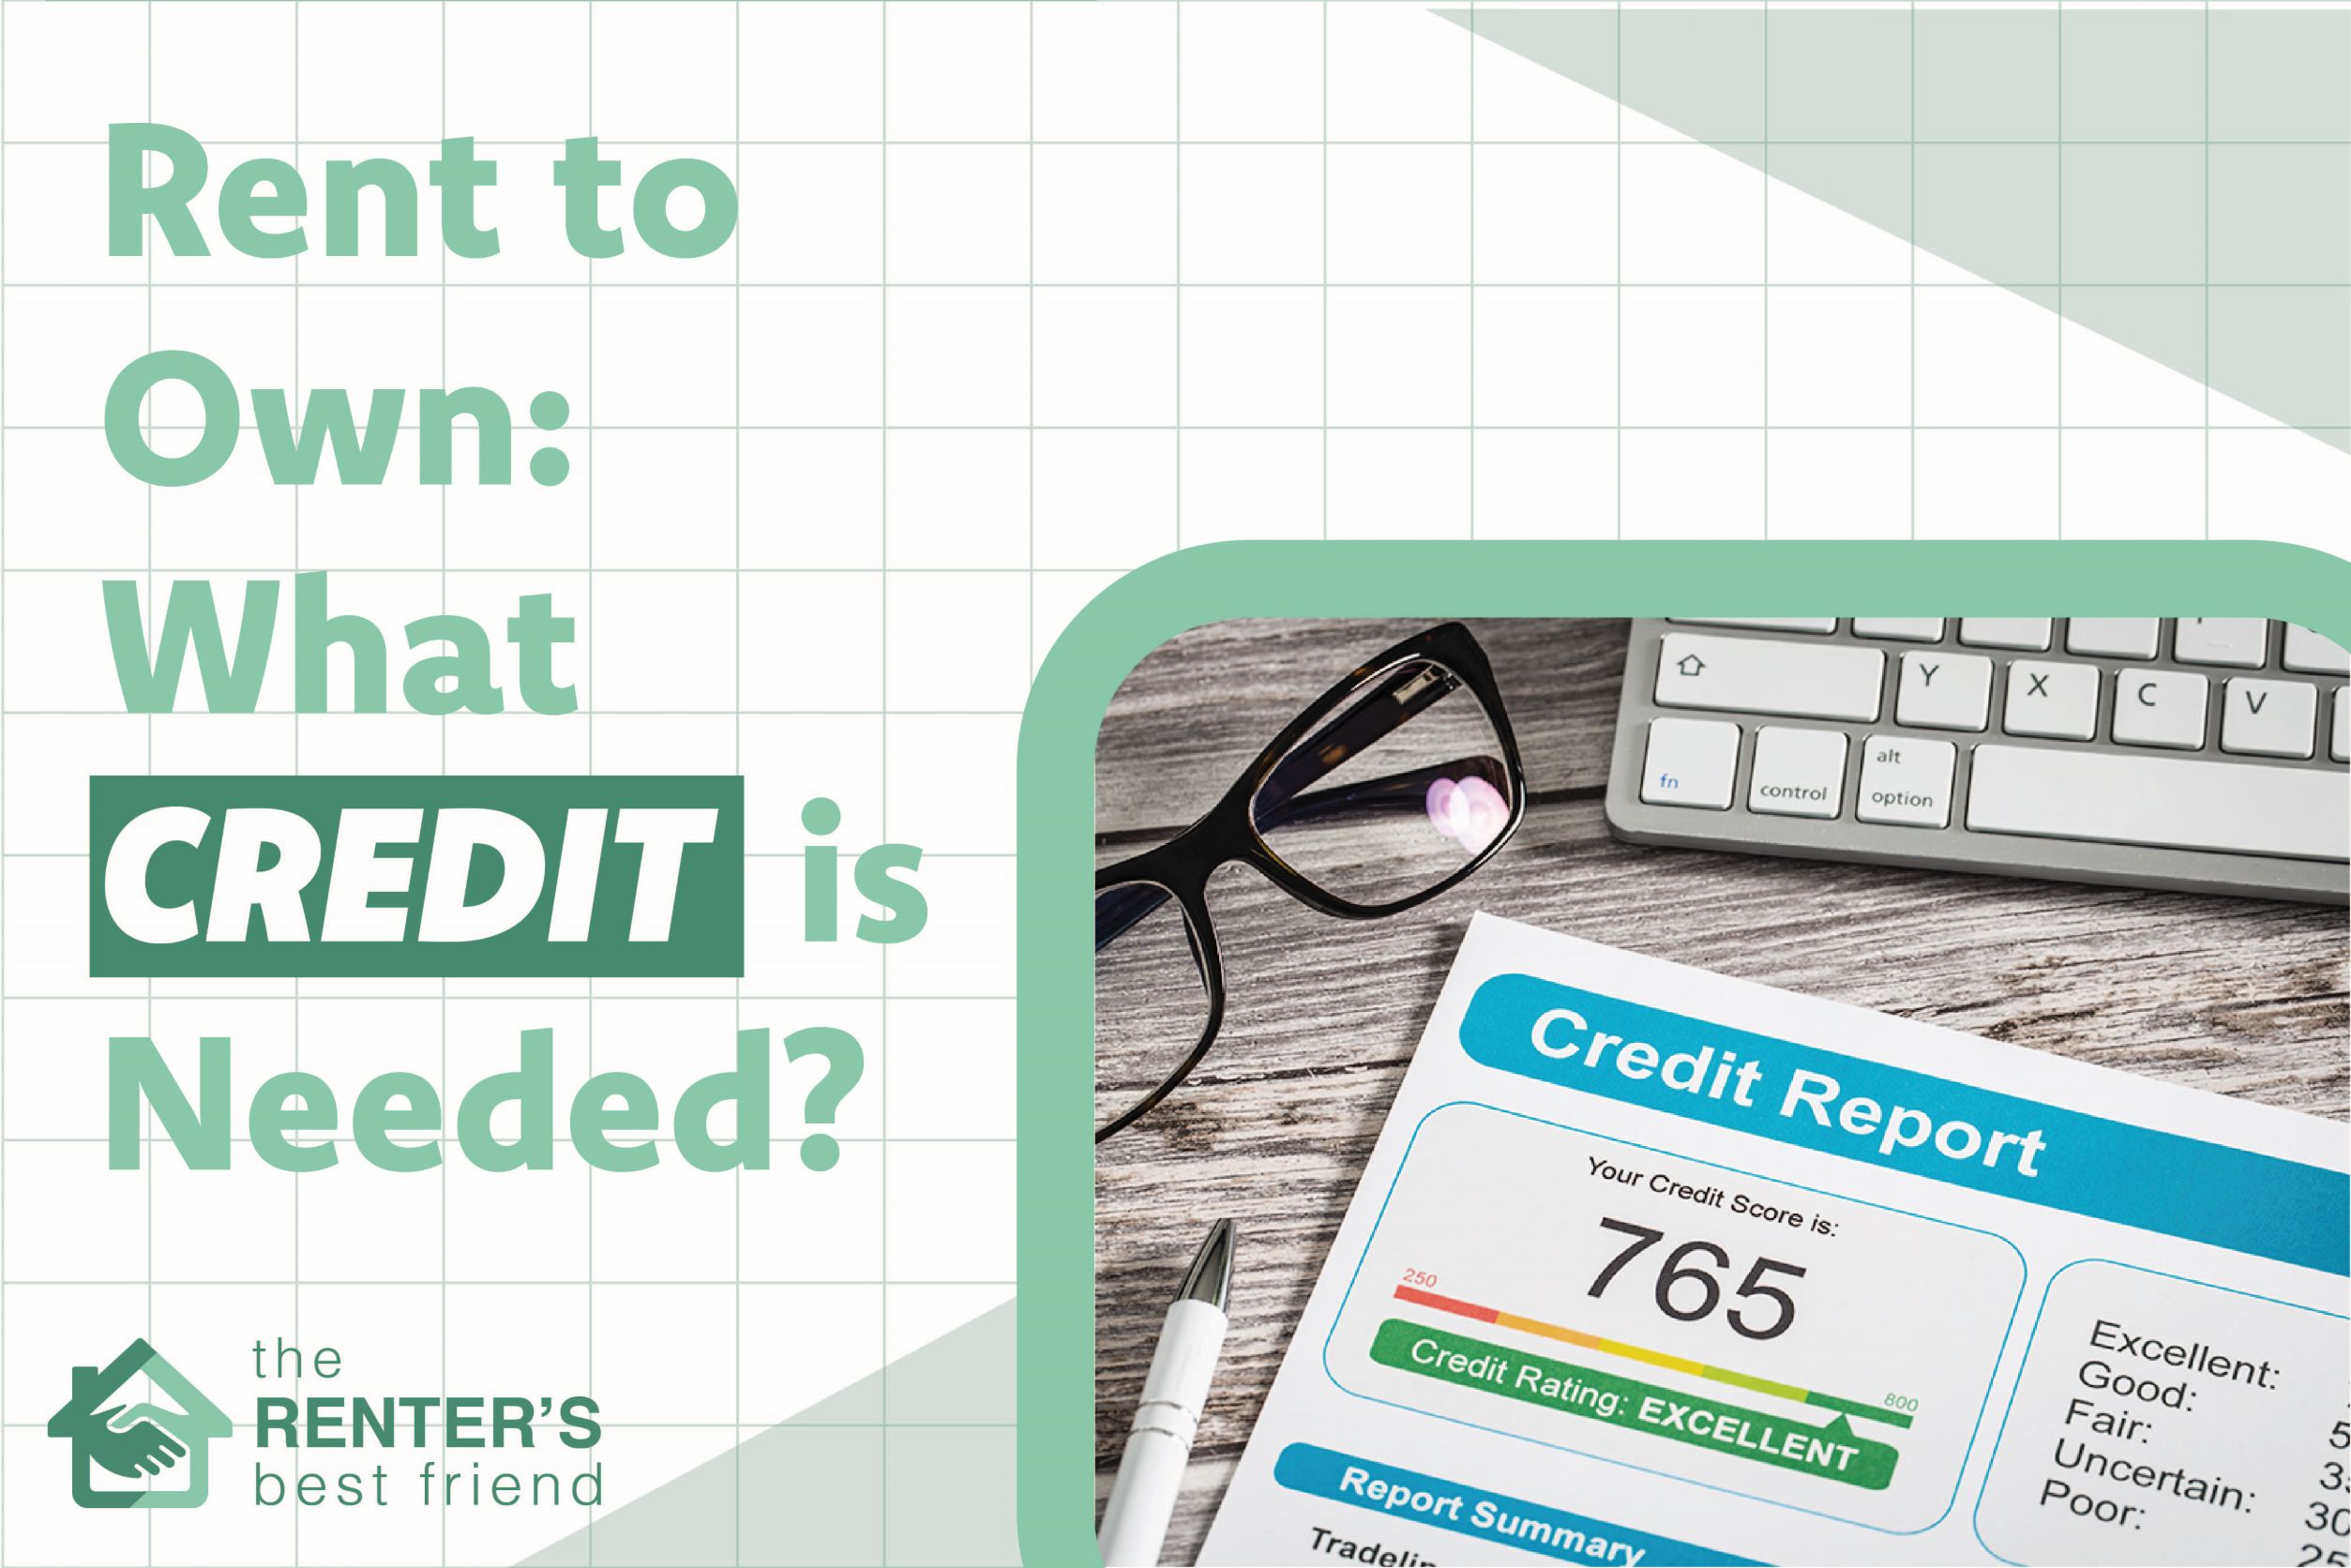 Rent to Own: What Credit is Needed?